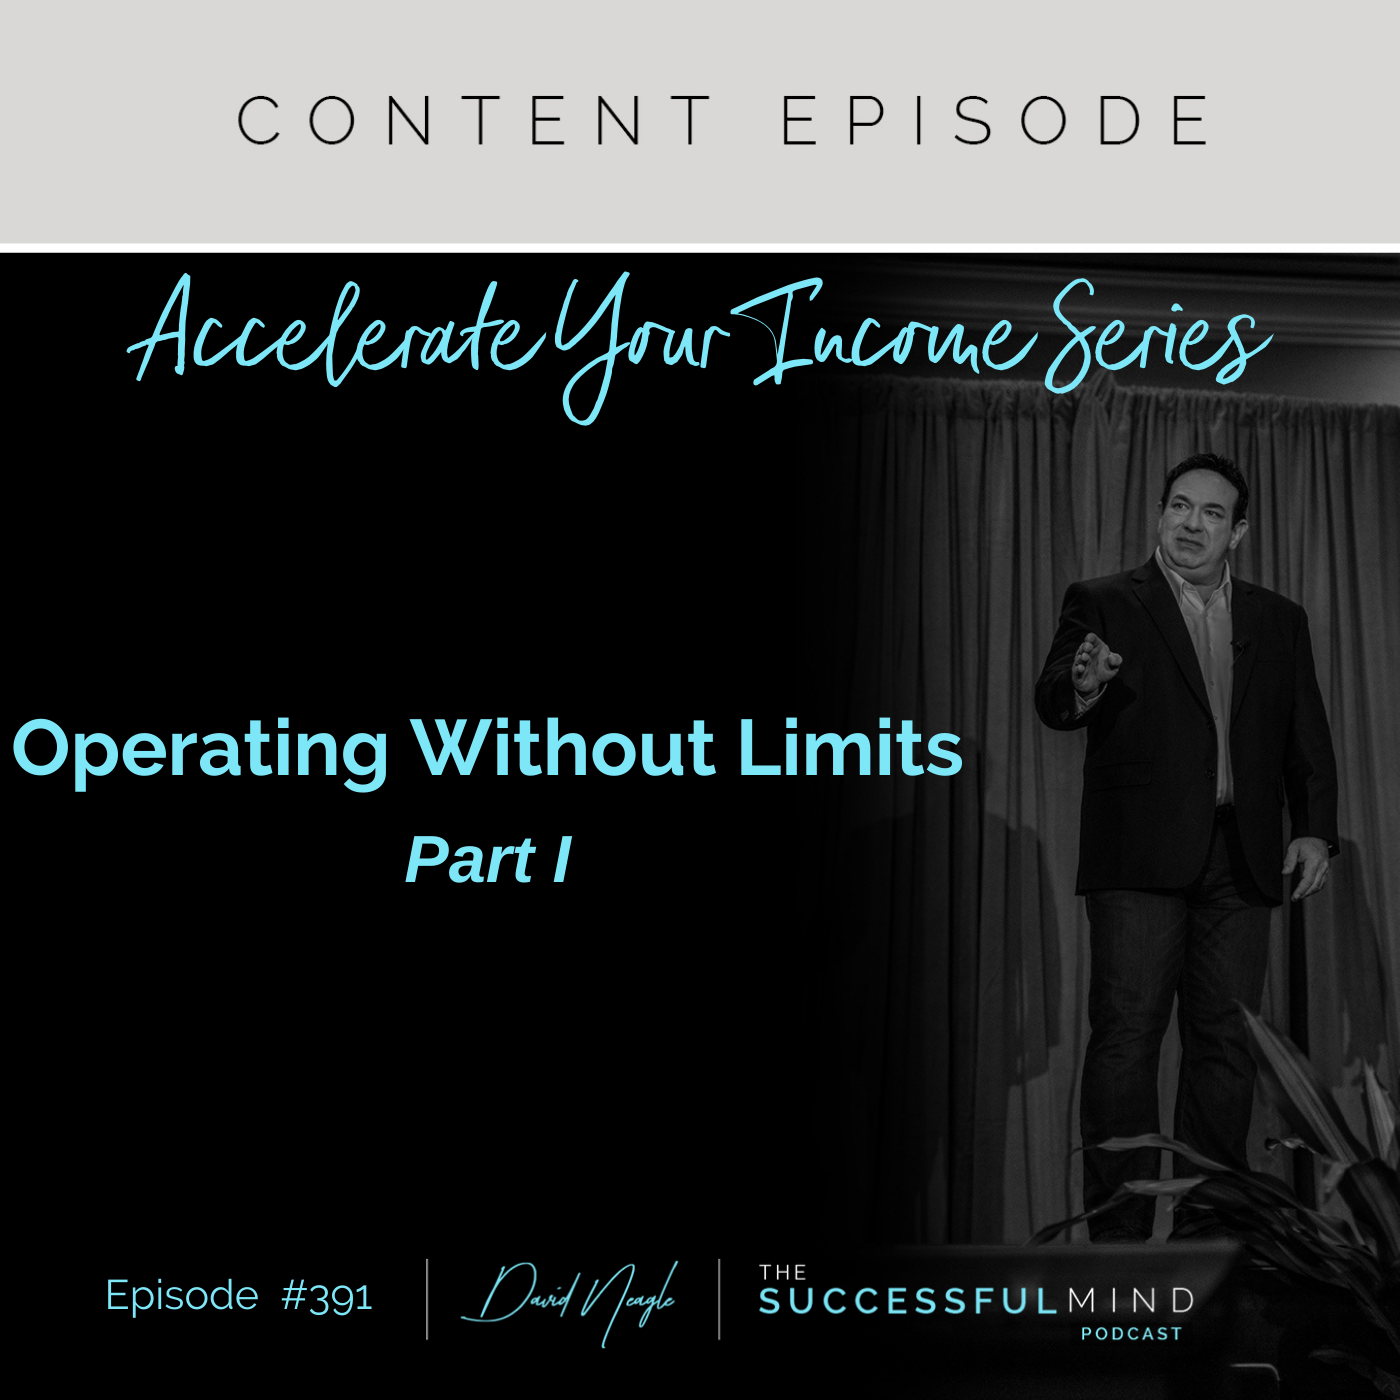 The Successful Mind Podcast - Episode 391 - Accelerate Your Income Series: Operating Without Limits - Part I